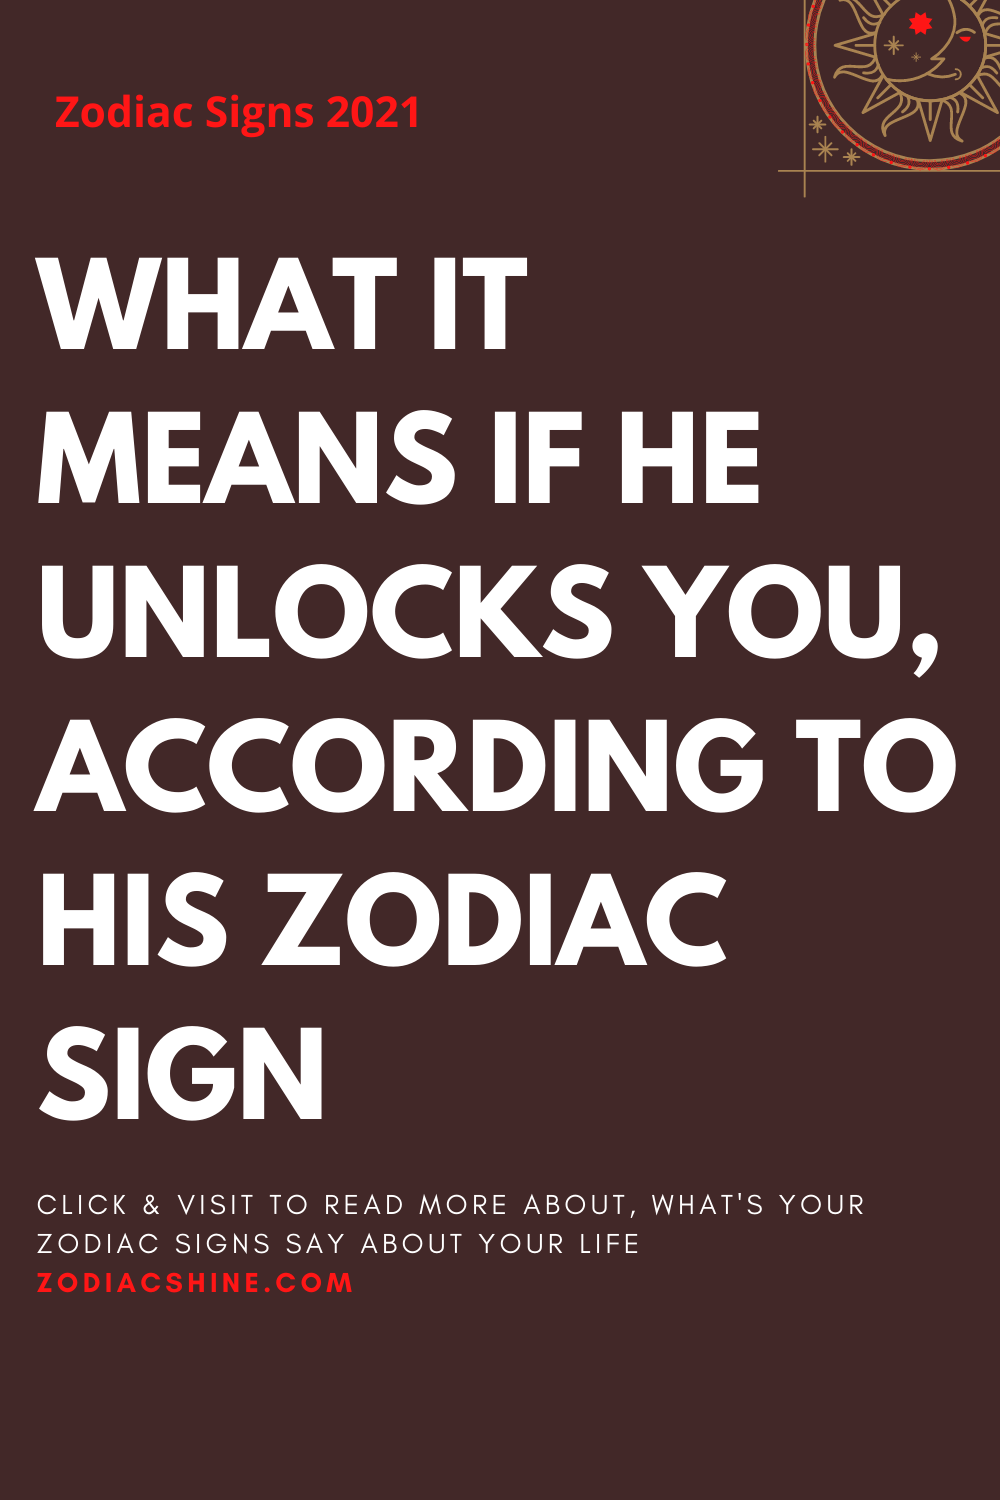 WHAT IT MEANS IF HE UNLOCKS YOU, ACCORDING TO HIS ZODIAC SIGN